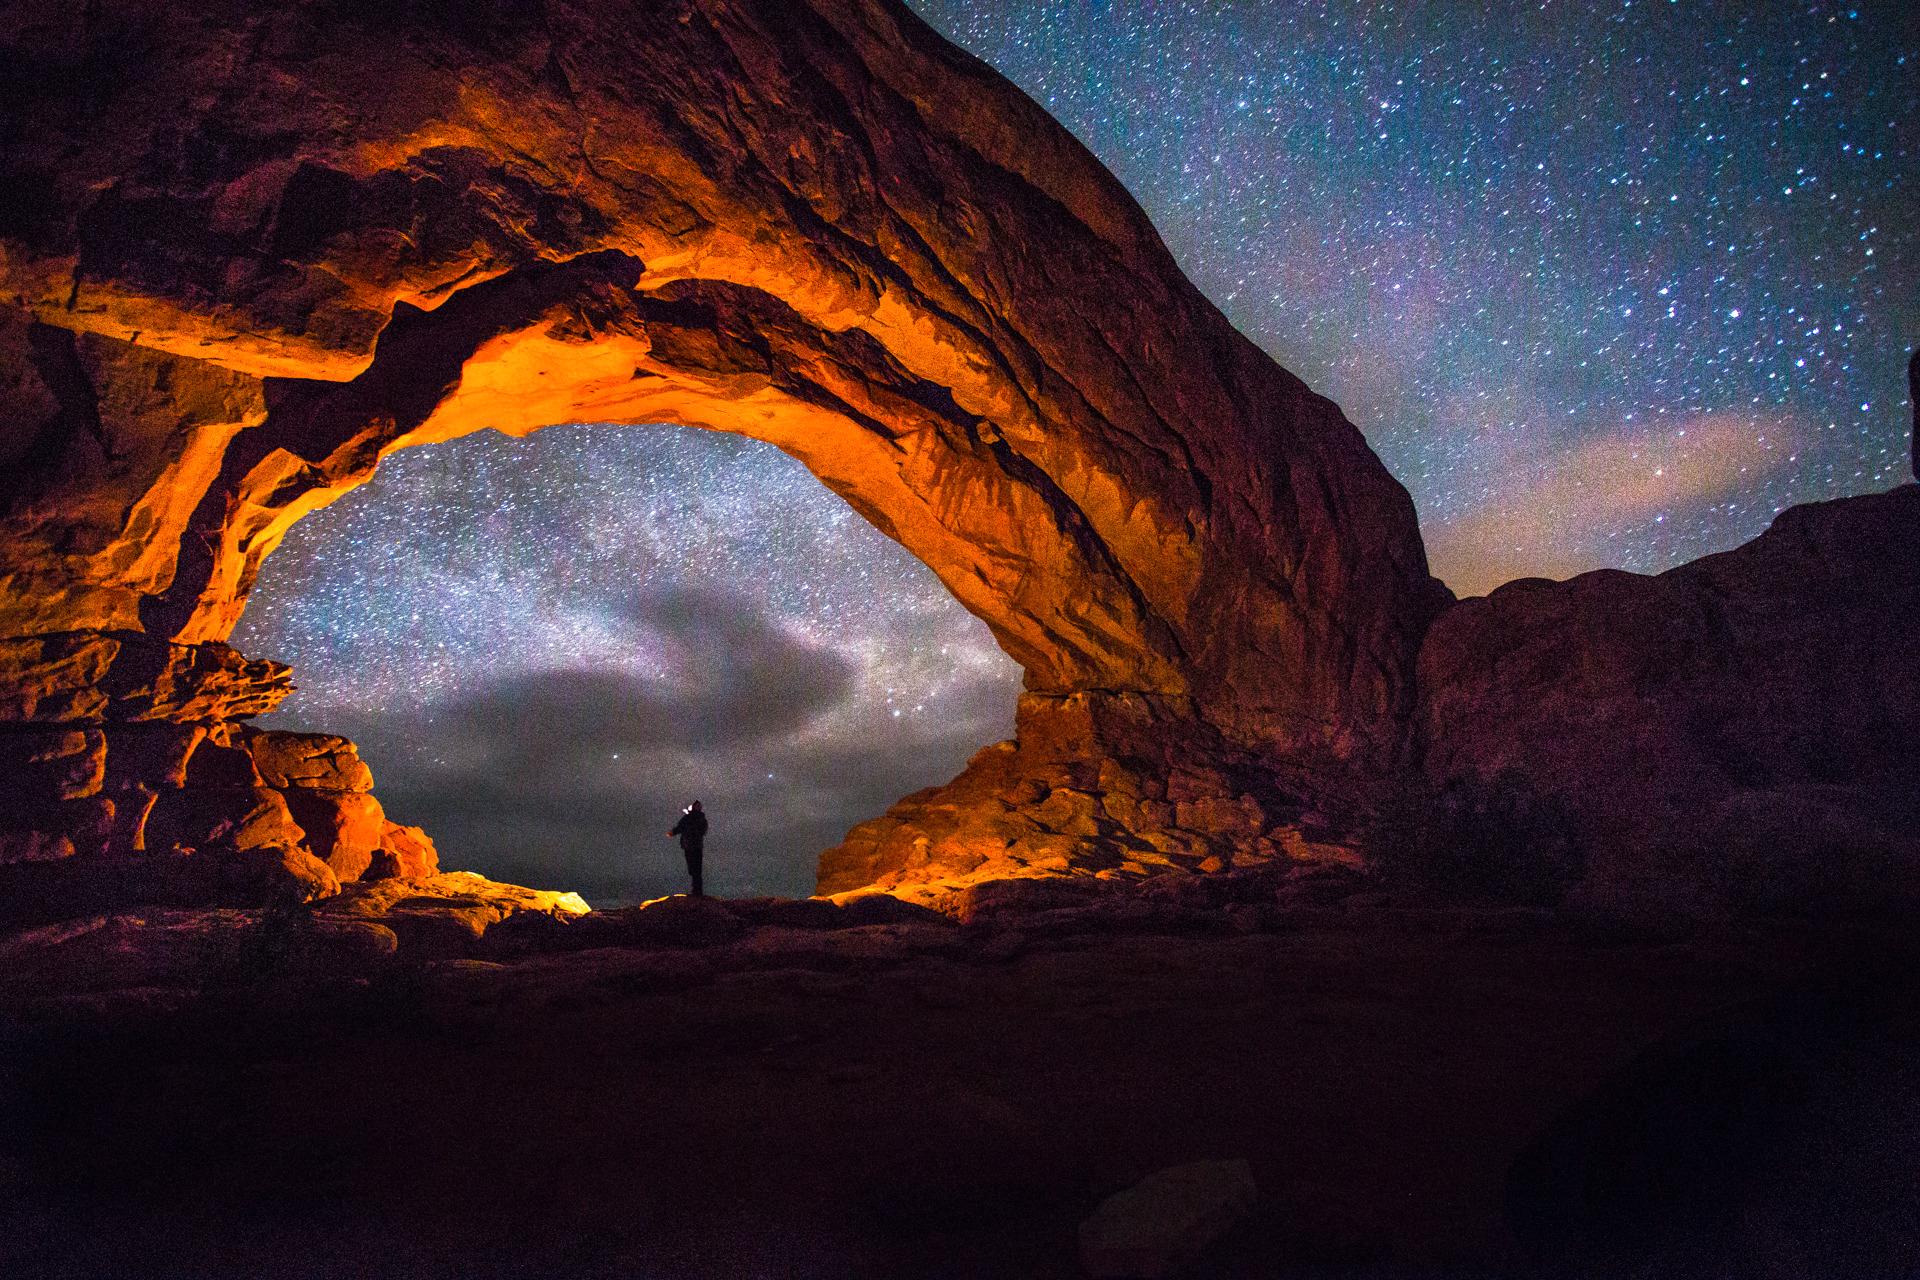 Just me, observing the stars above ancient sandstone landscape of Arches National Park. It's amazing how when we view our earthly environment in its natural state, the more alien it becomes. Single exposure, no composites. Foto: Krishan Bansal, Shortlist, Youth Competition, 2015 Sony World Photography Awards